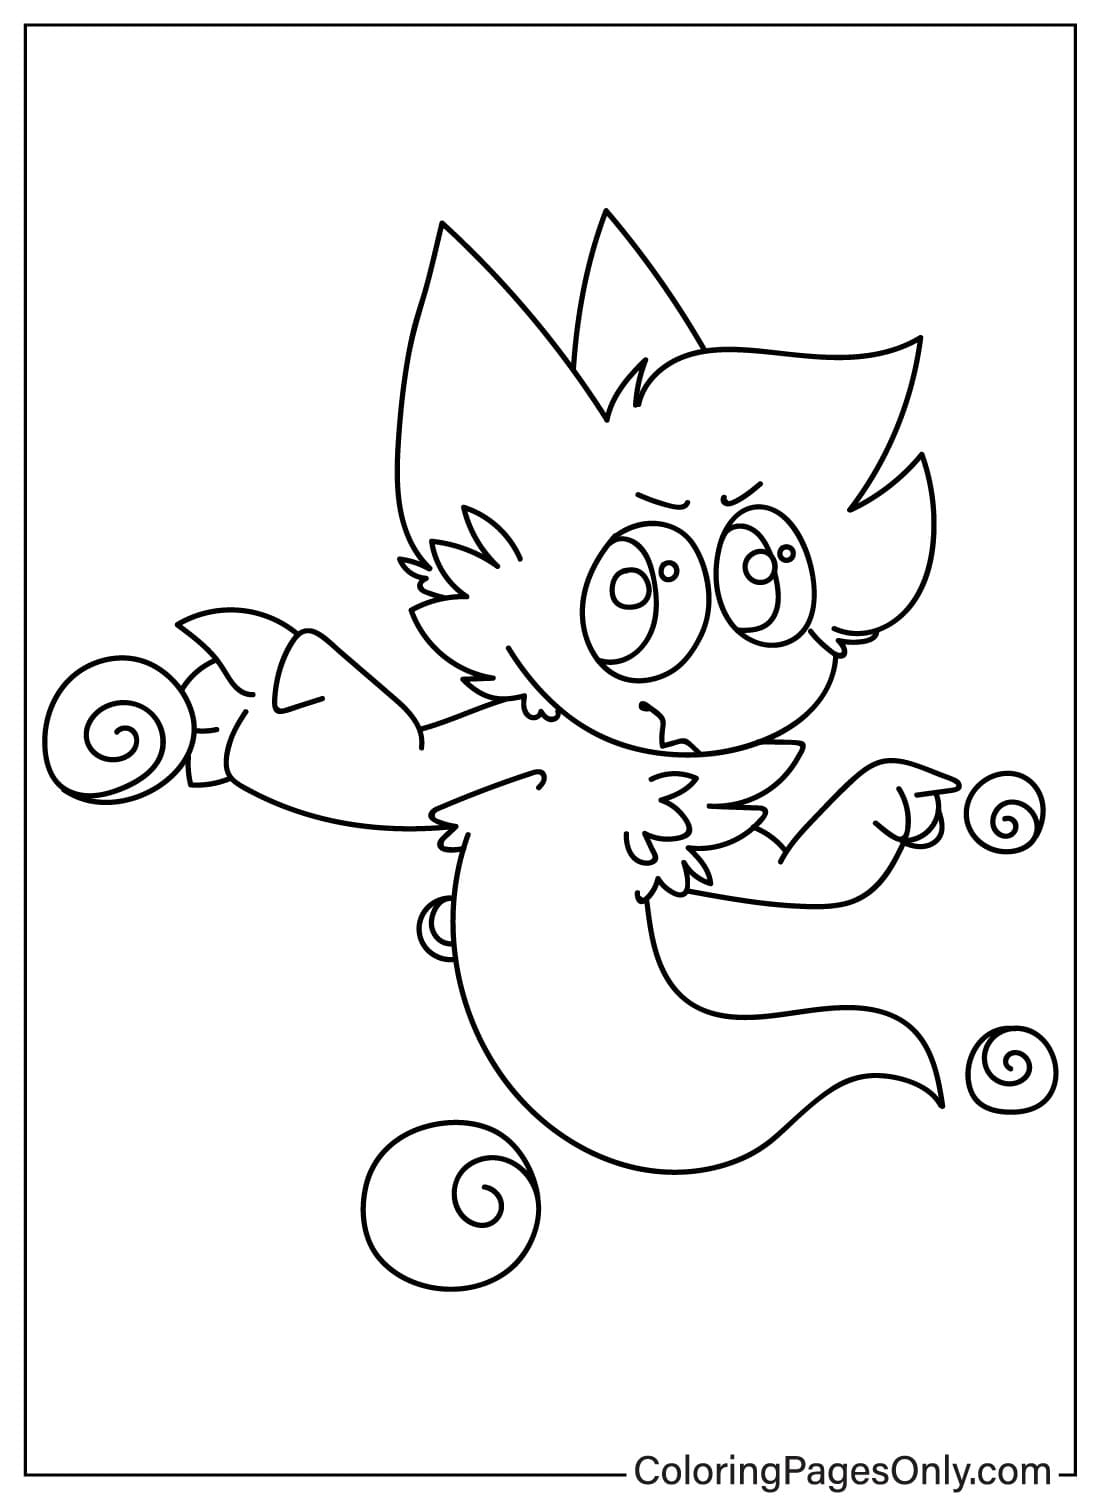 Printable Ghazt Coloring Page from Ghazt